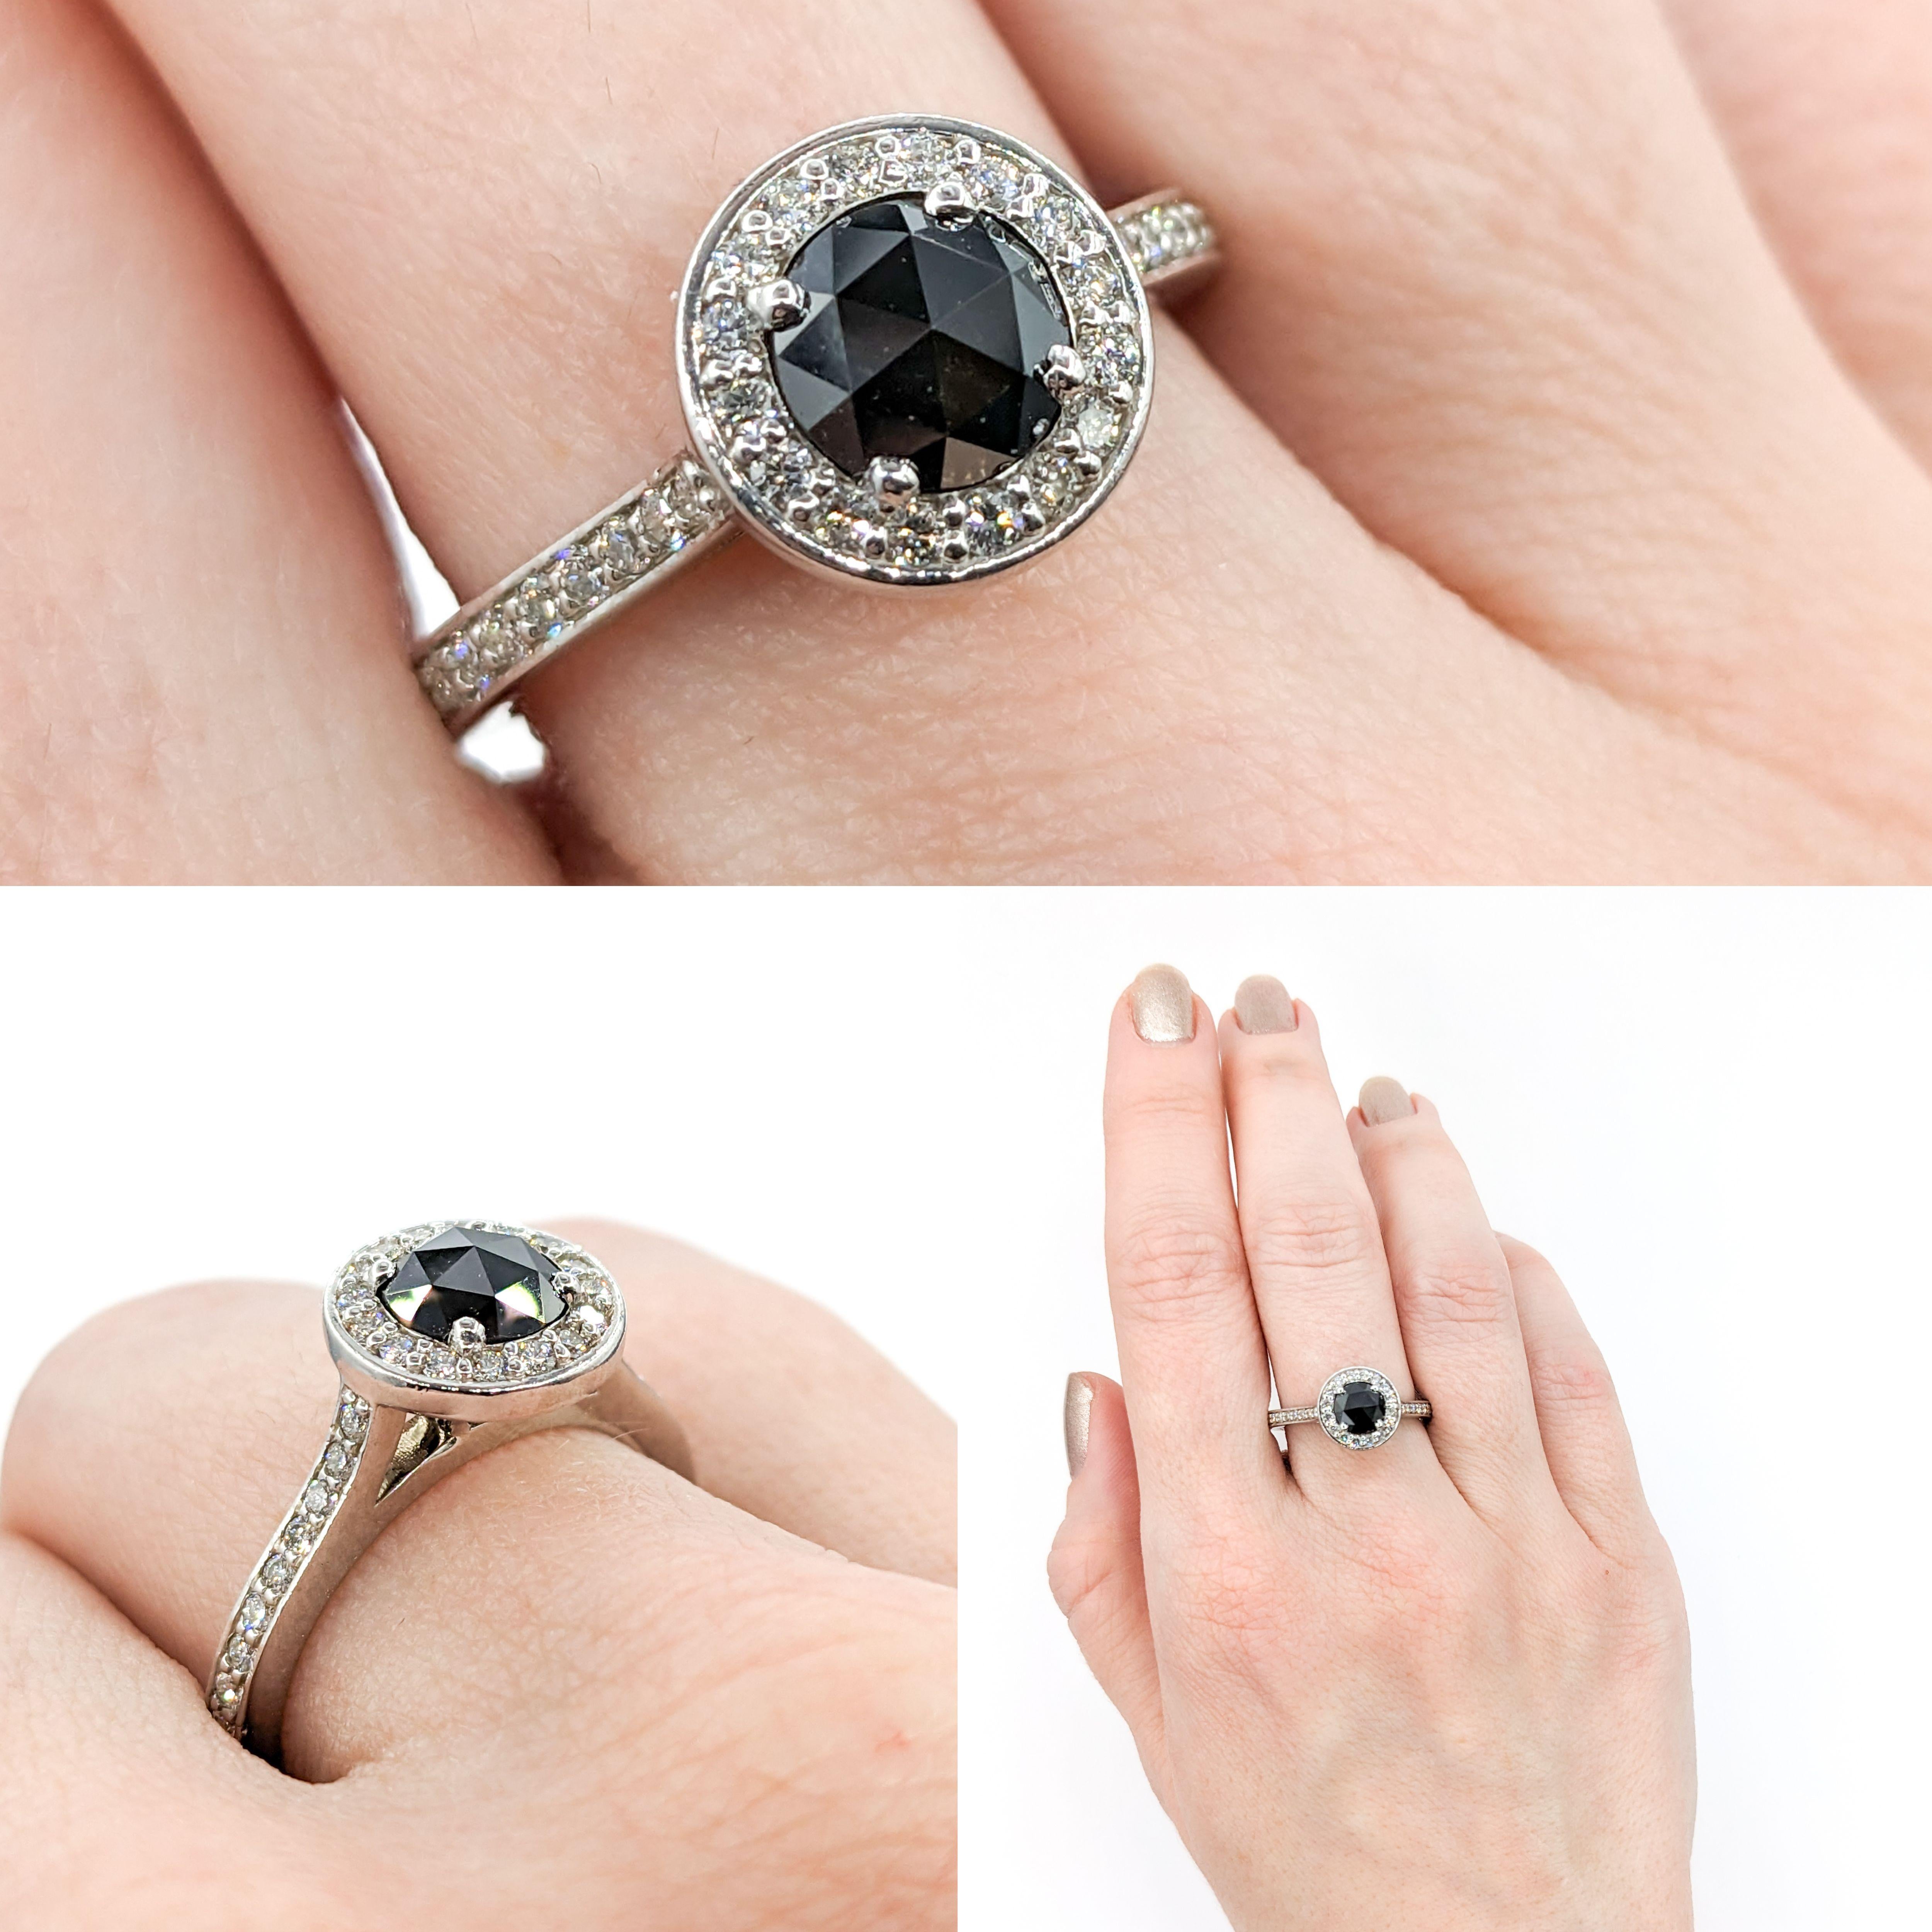 1.25ct Black & White Diamond Ring In White Gold

Presenting a stunning ring, exquisitely set in 14kt white gold, this piece is highlighted by a captivating 1.25 carat round black diamond. The lustrous diamond offers a bold statement with its deep